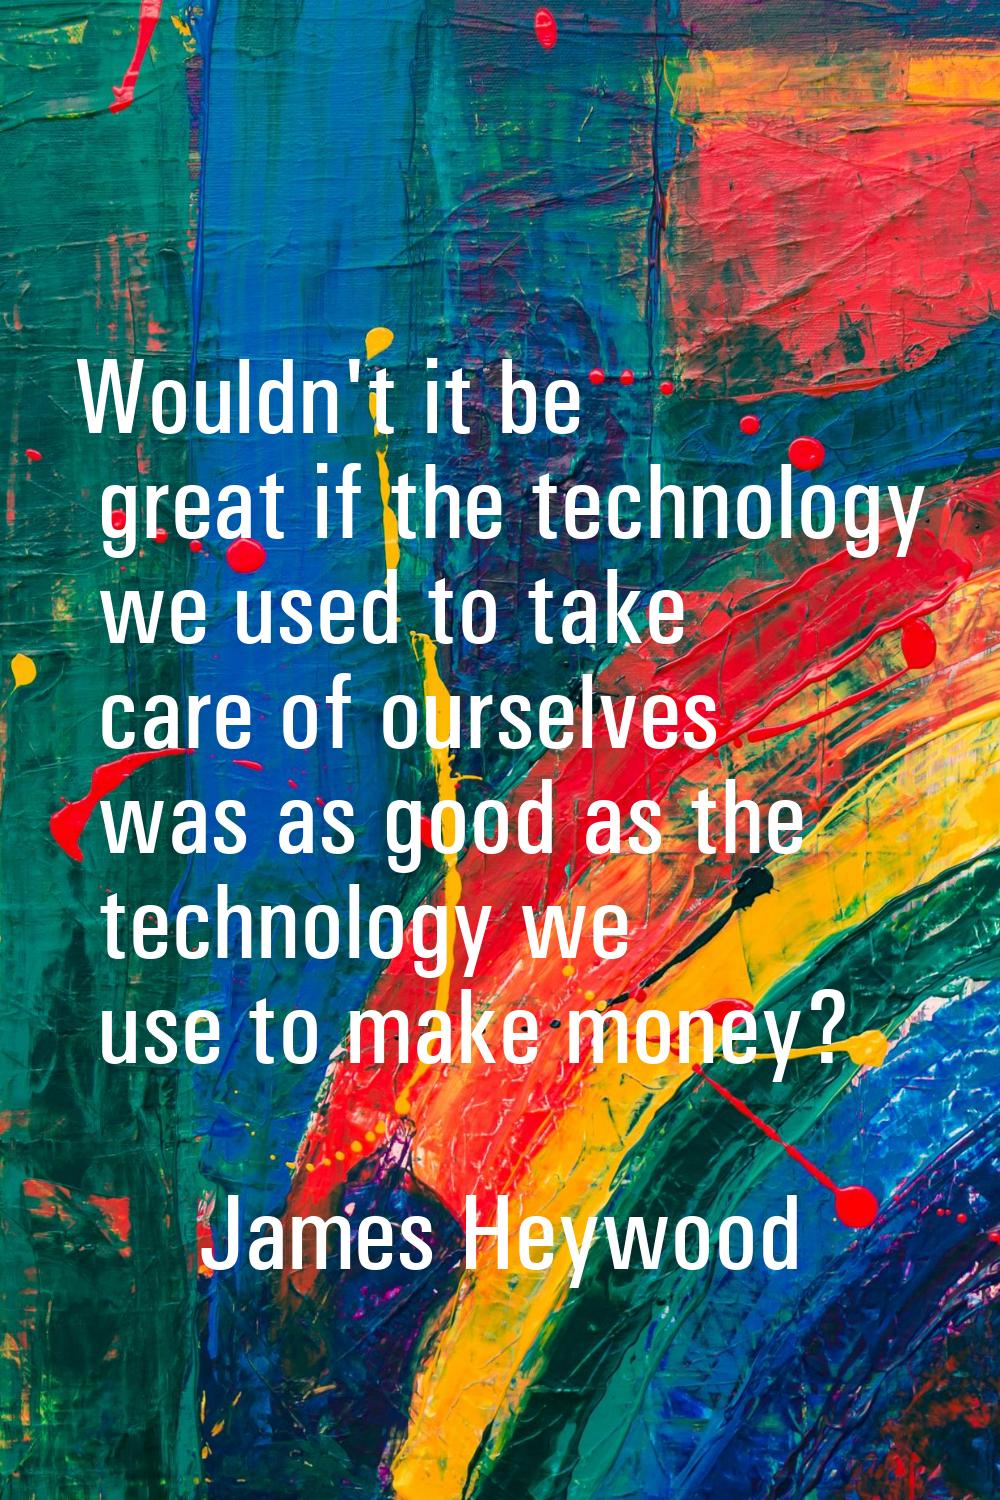 Wouldn't it be great if the technology we used to take care of ourselves was as good as the technol